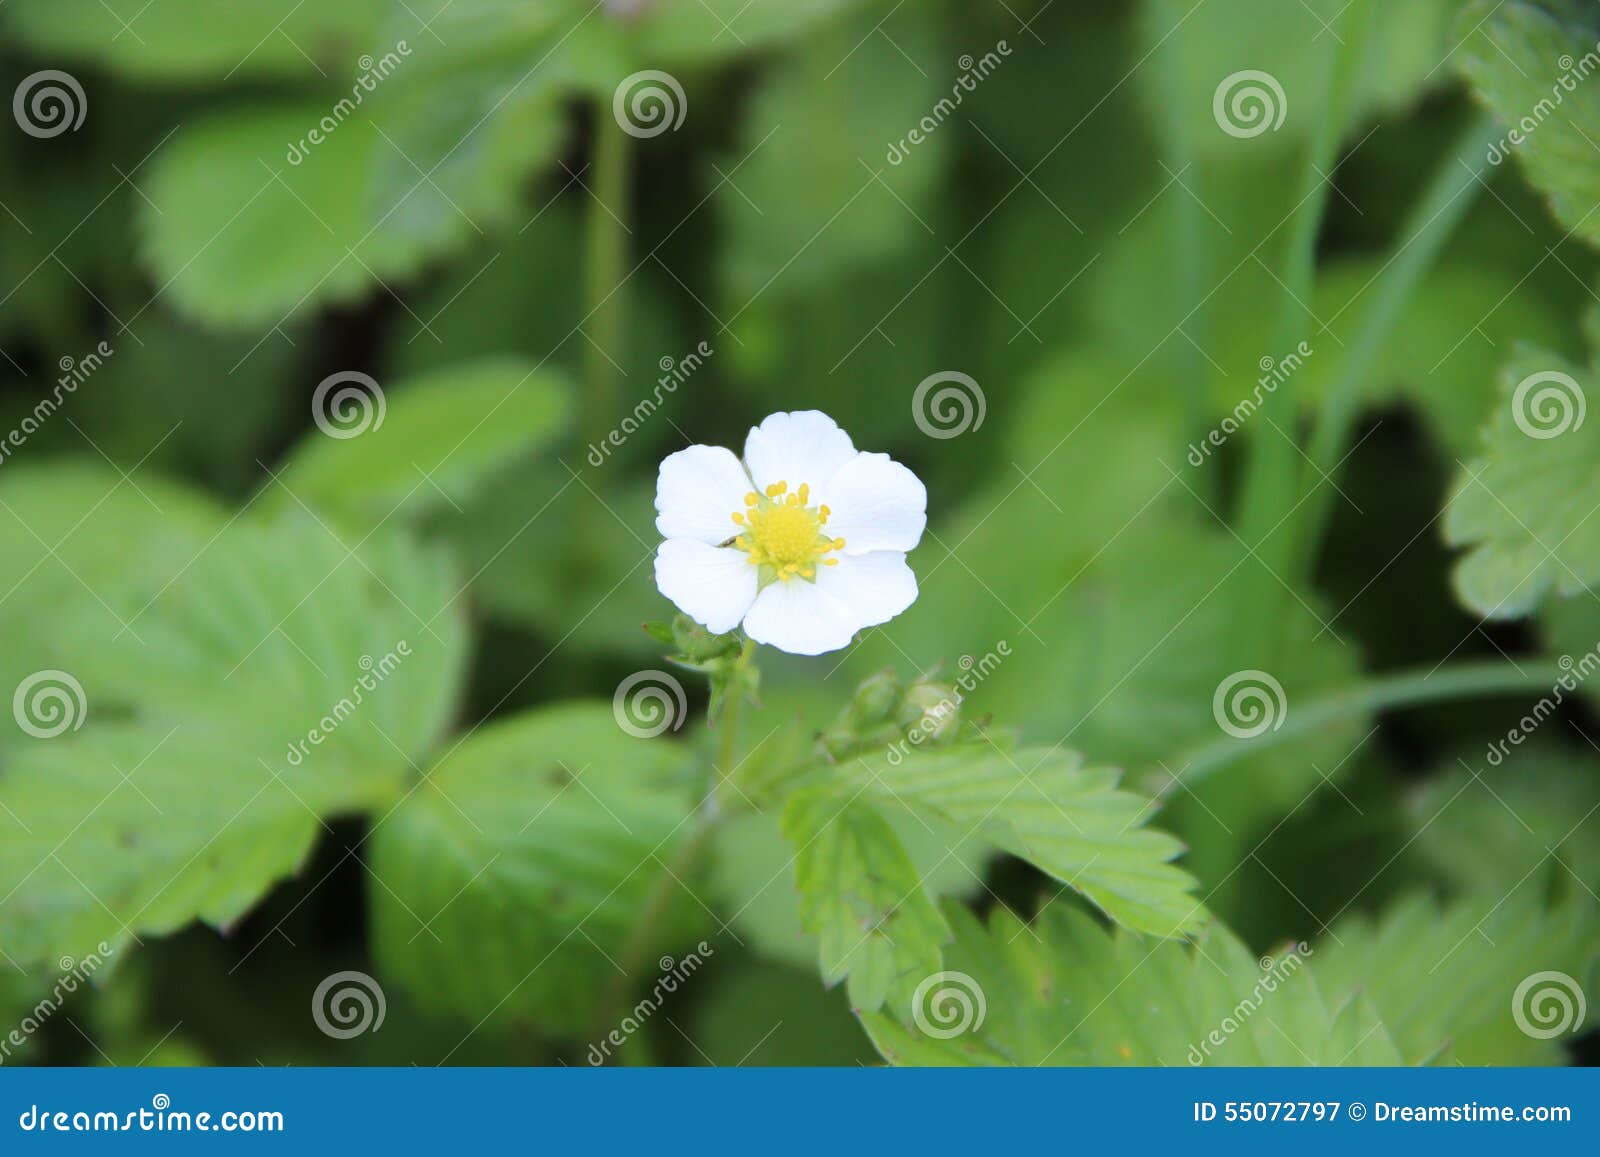 fragaria vesca, commonly called wild strawberry, woodland strawberry, alpine strawberry, european strawberry, or fraise des bois,